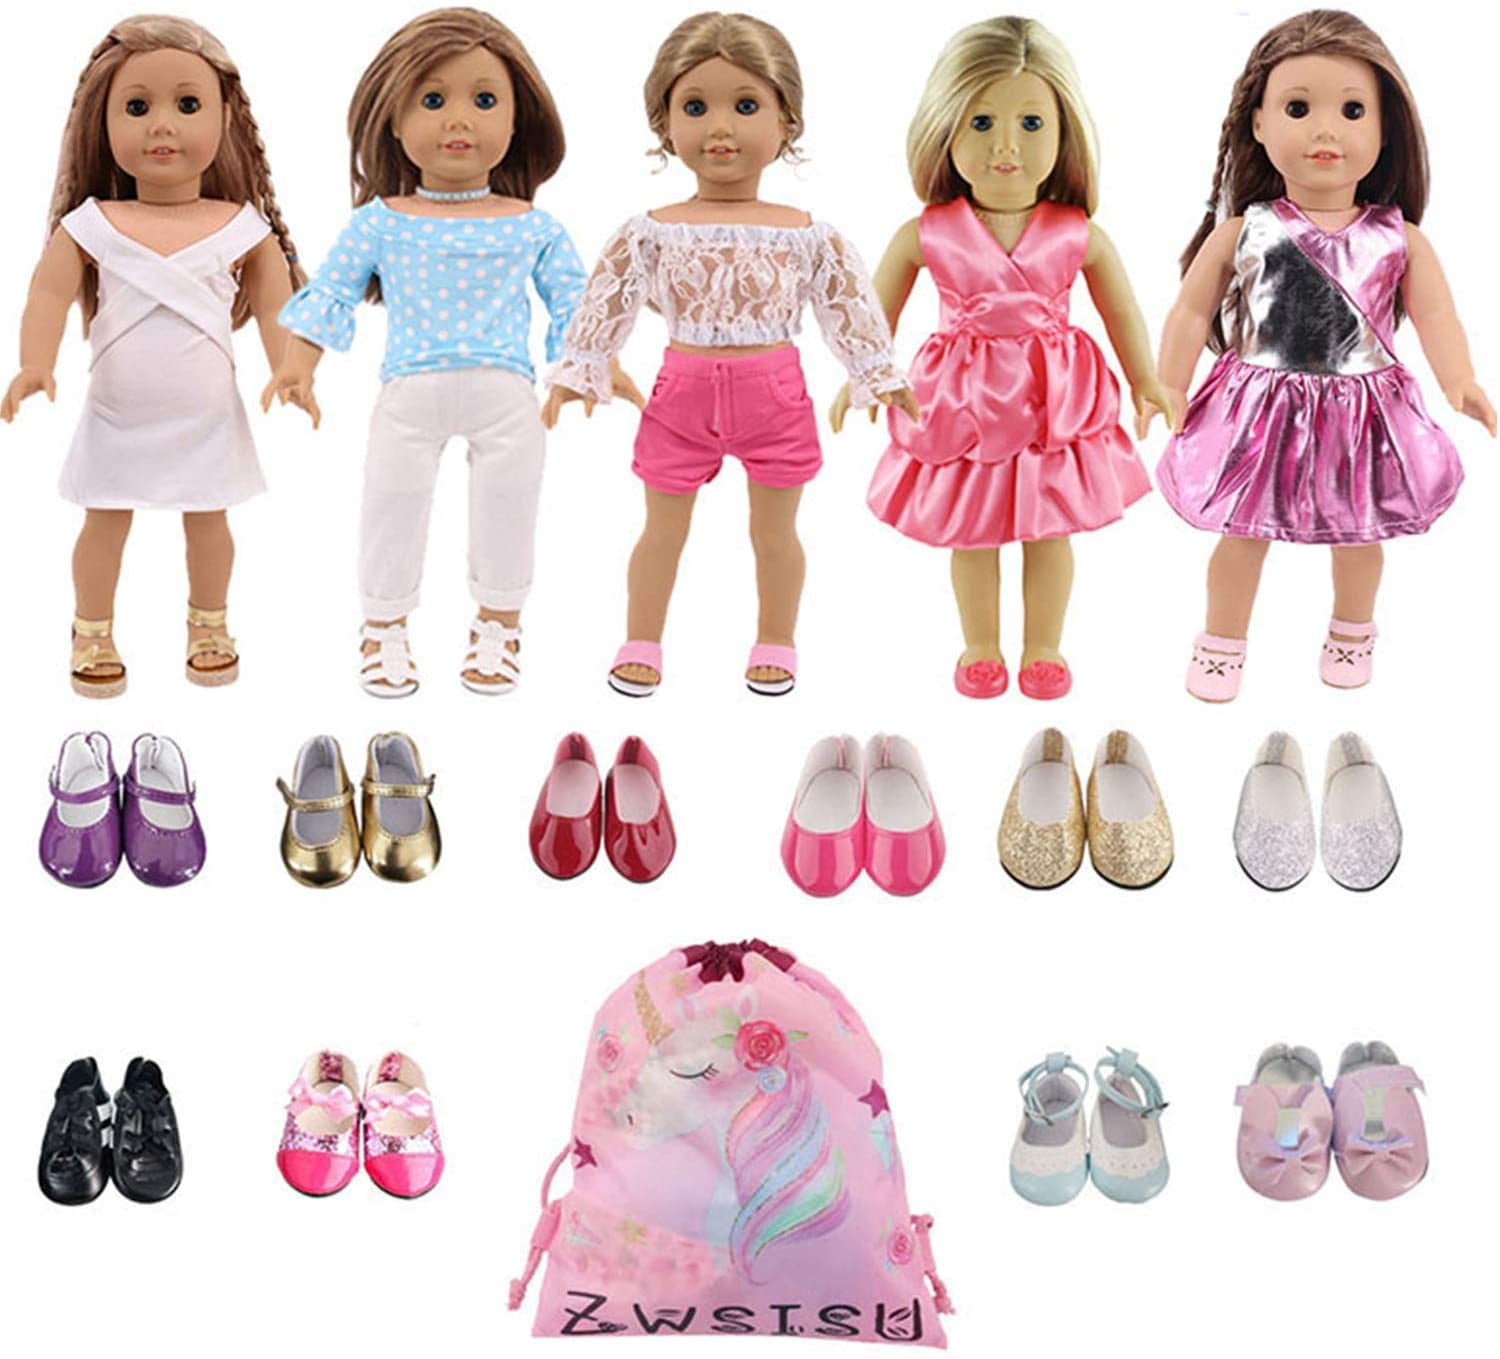 Journey Girls Dolls by Our Generation ZWSISU 7 Outfits Doll Clothes Fits American Doll 